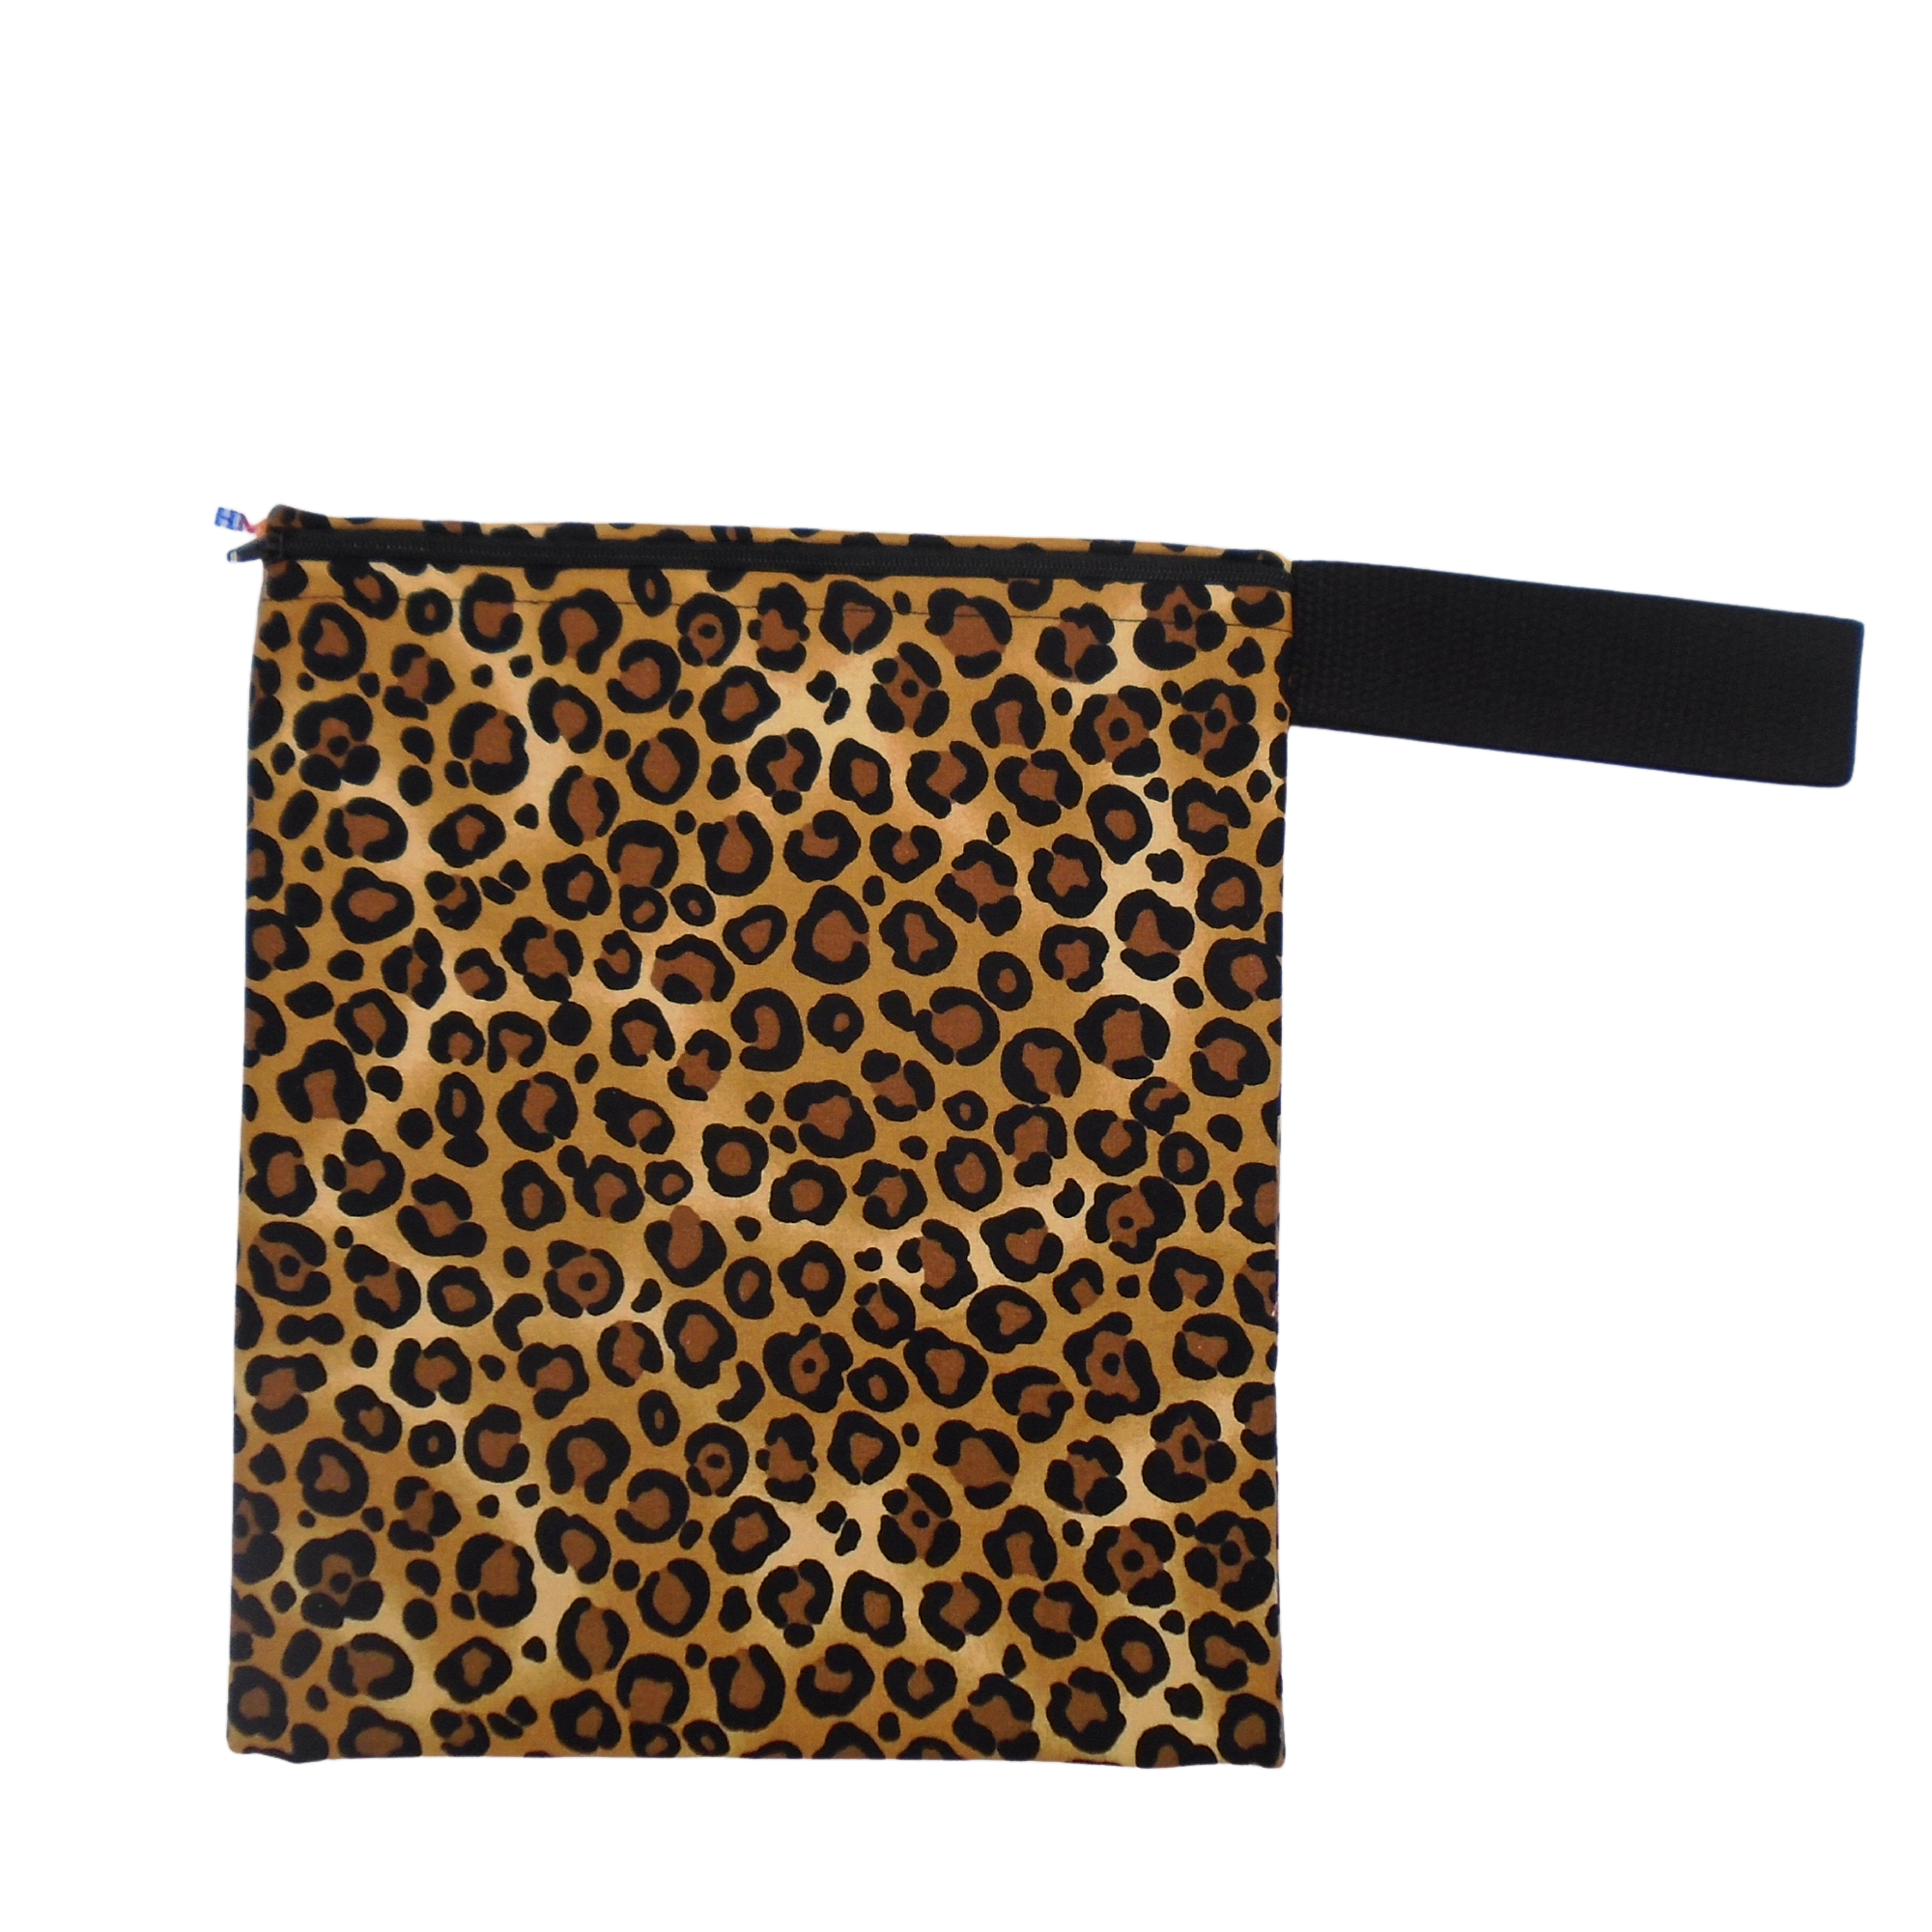 Leopard Print -  Handy Poppins Pouch, Waterproof, Washable, Food Safe, Vegan, Lined Zip Bag With Wrist Strap